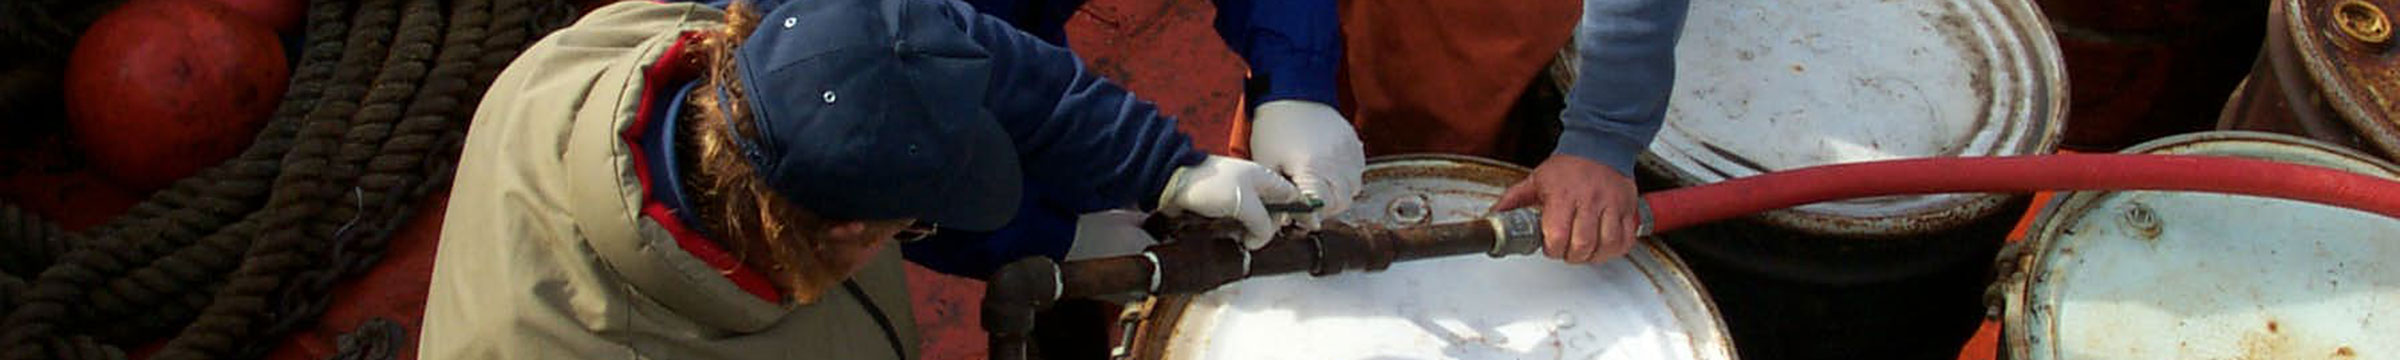 A group of people working on a pipe